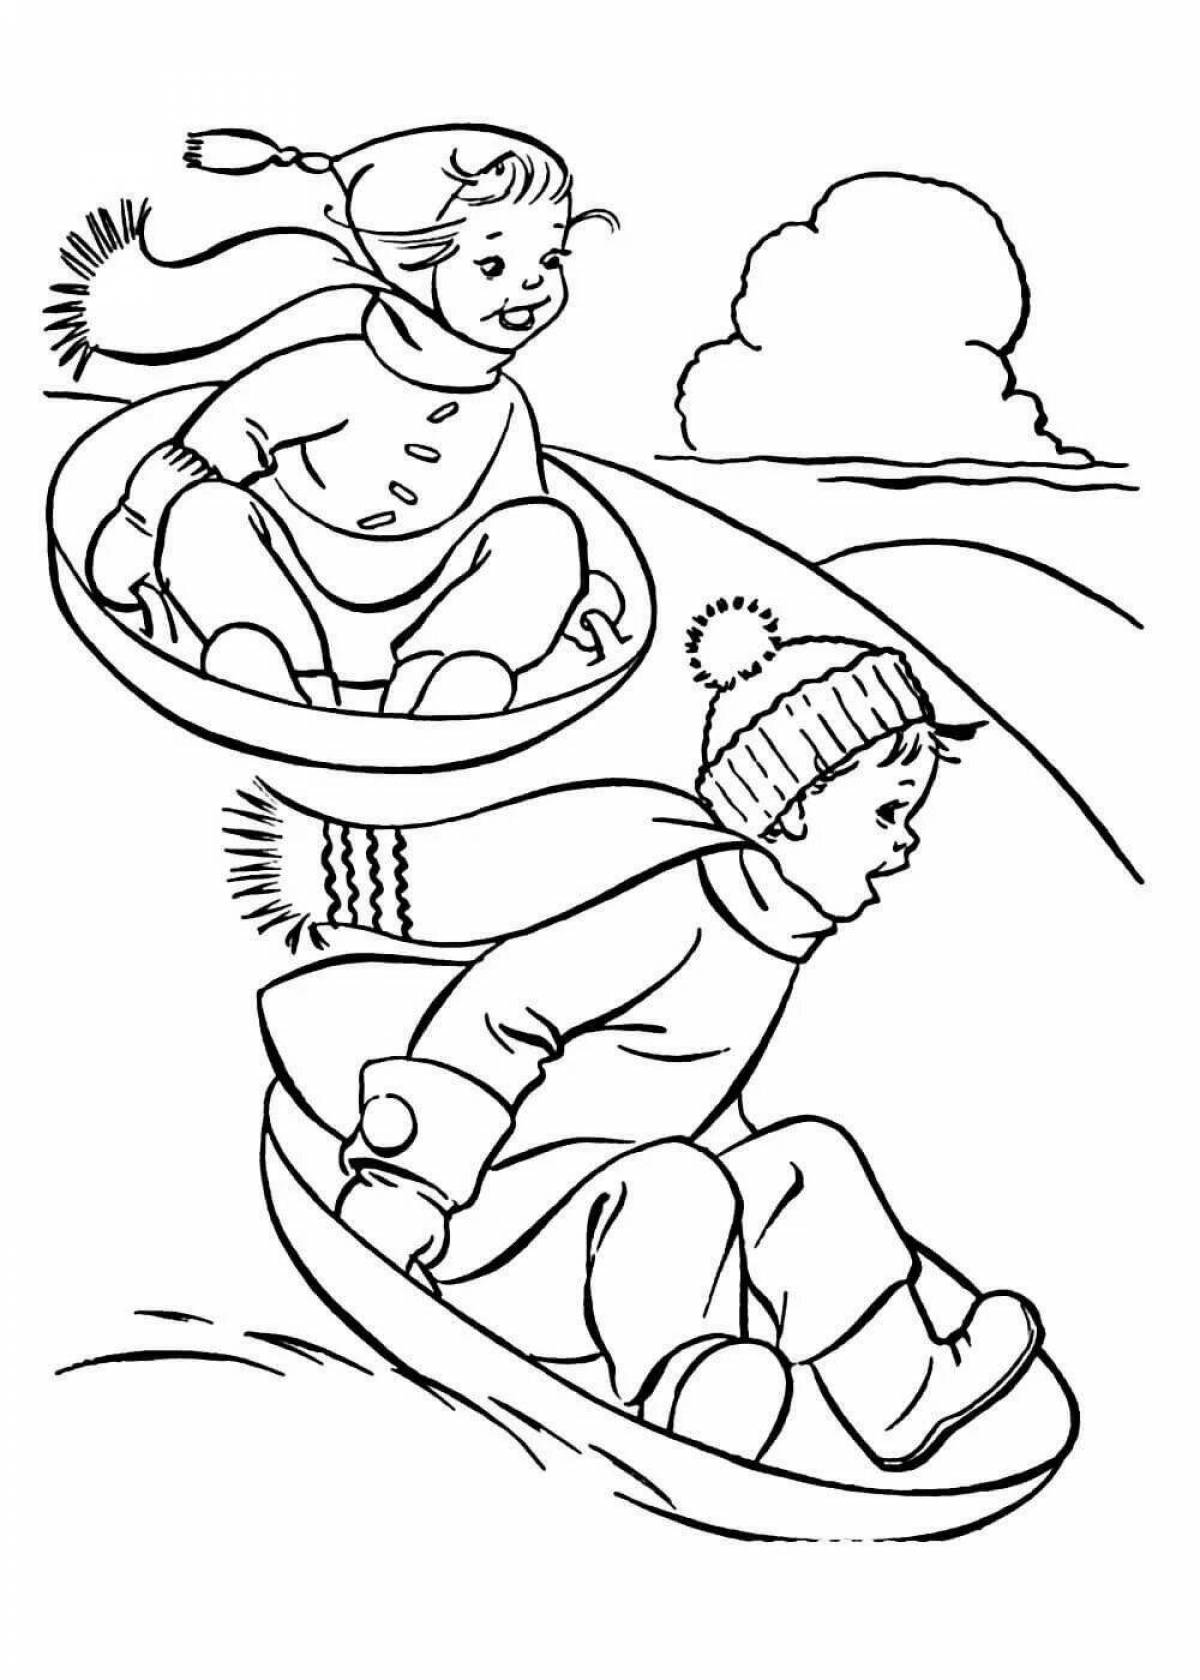 Amazing winter slide coloring page